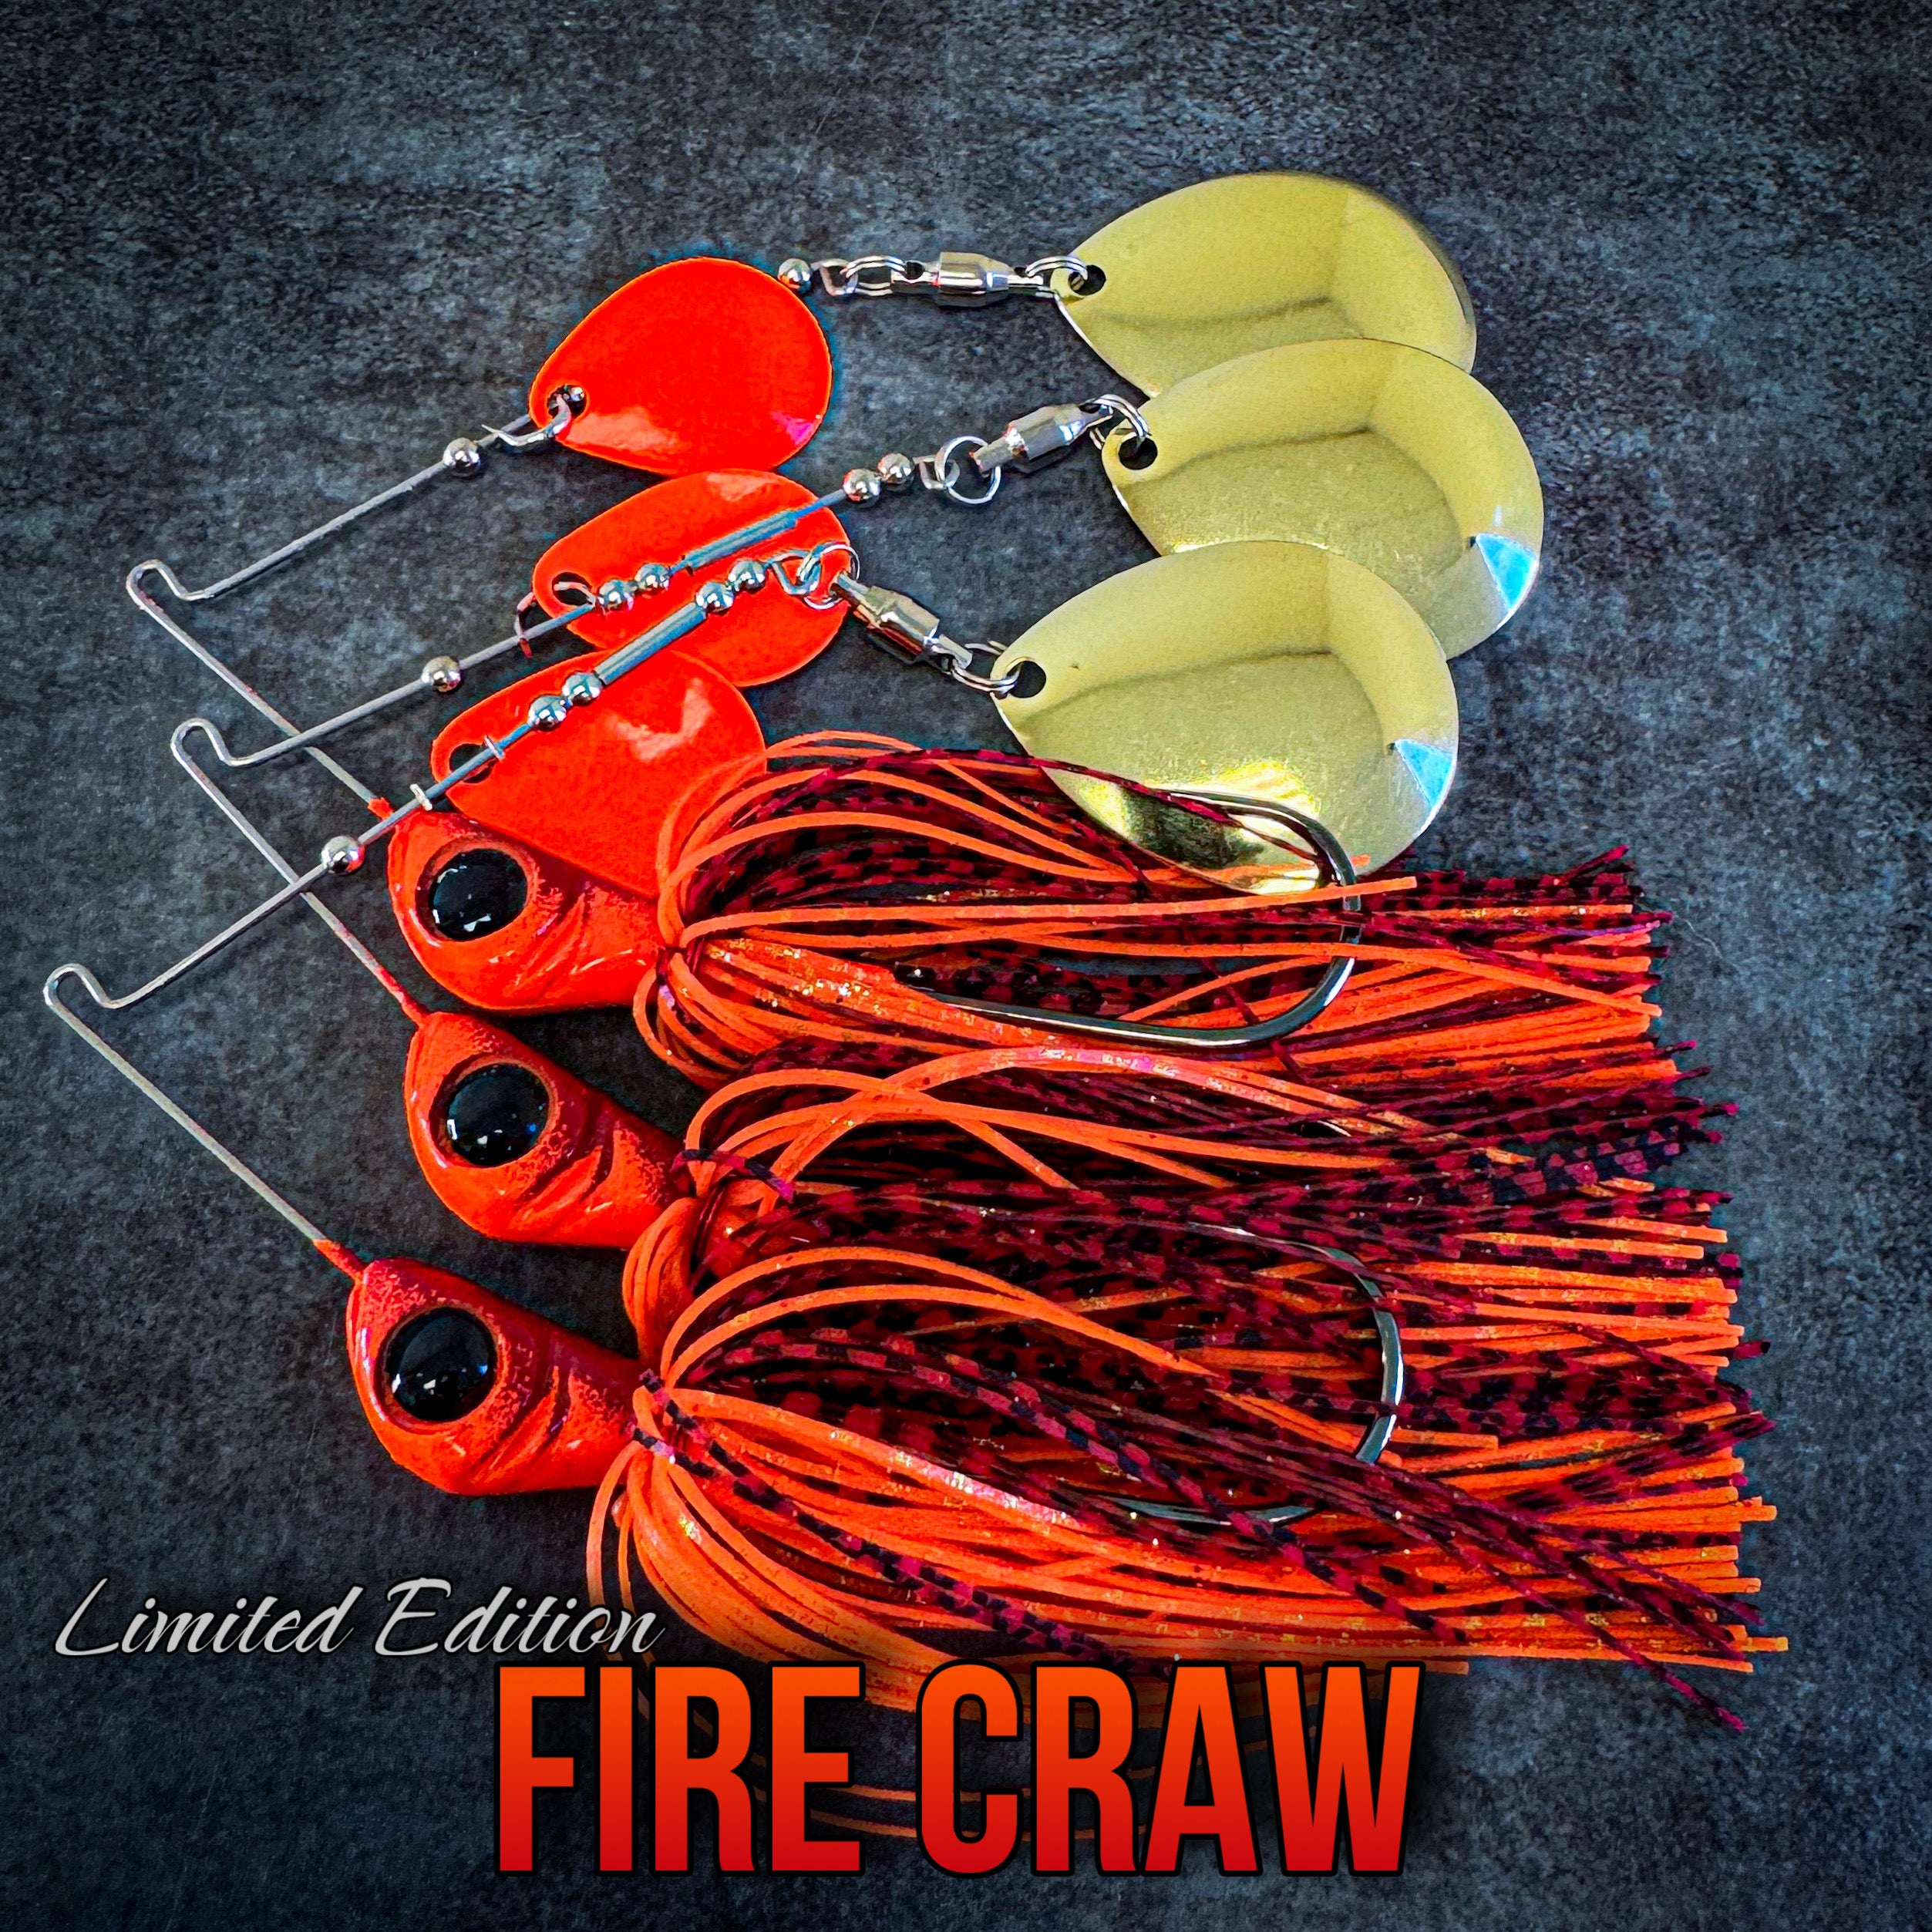 Exclusive Fire Craw Spinnerbait - DBL Colorado — Made to order please allow 1 week to ship